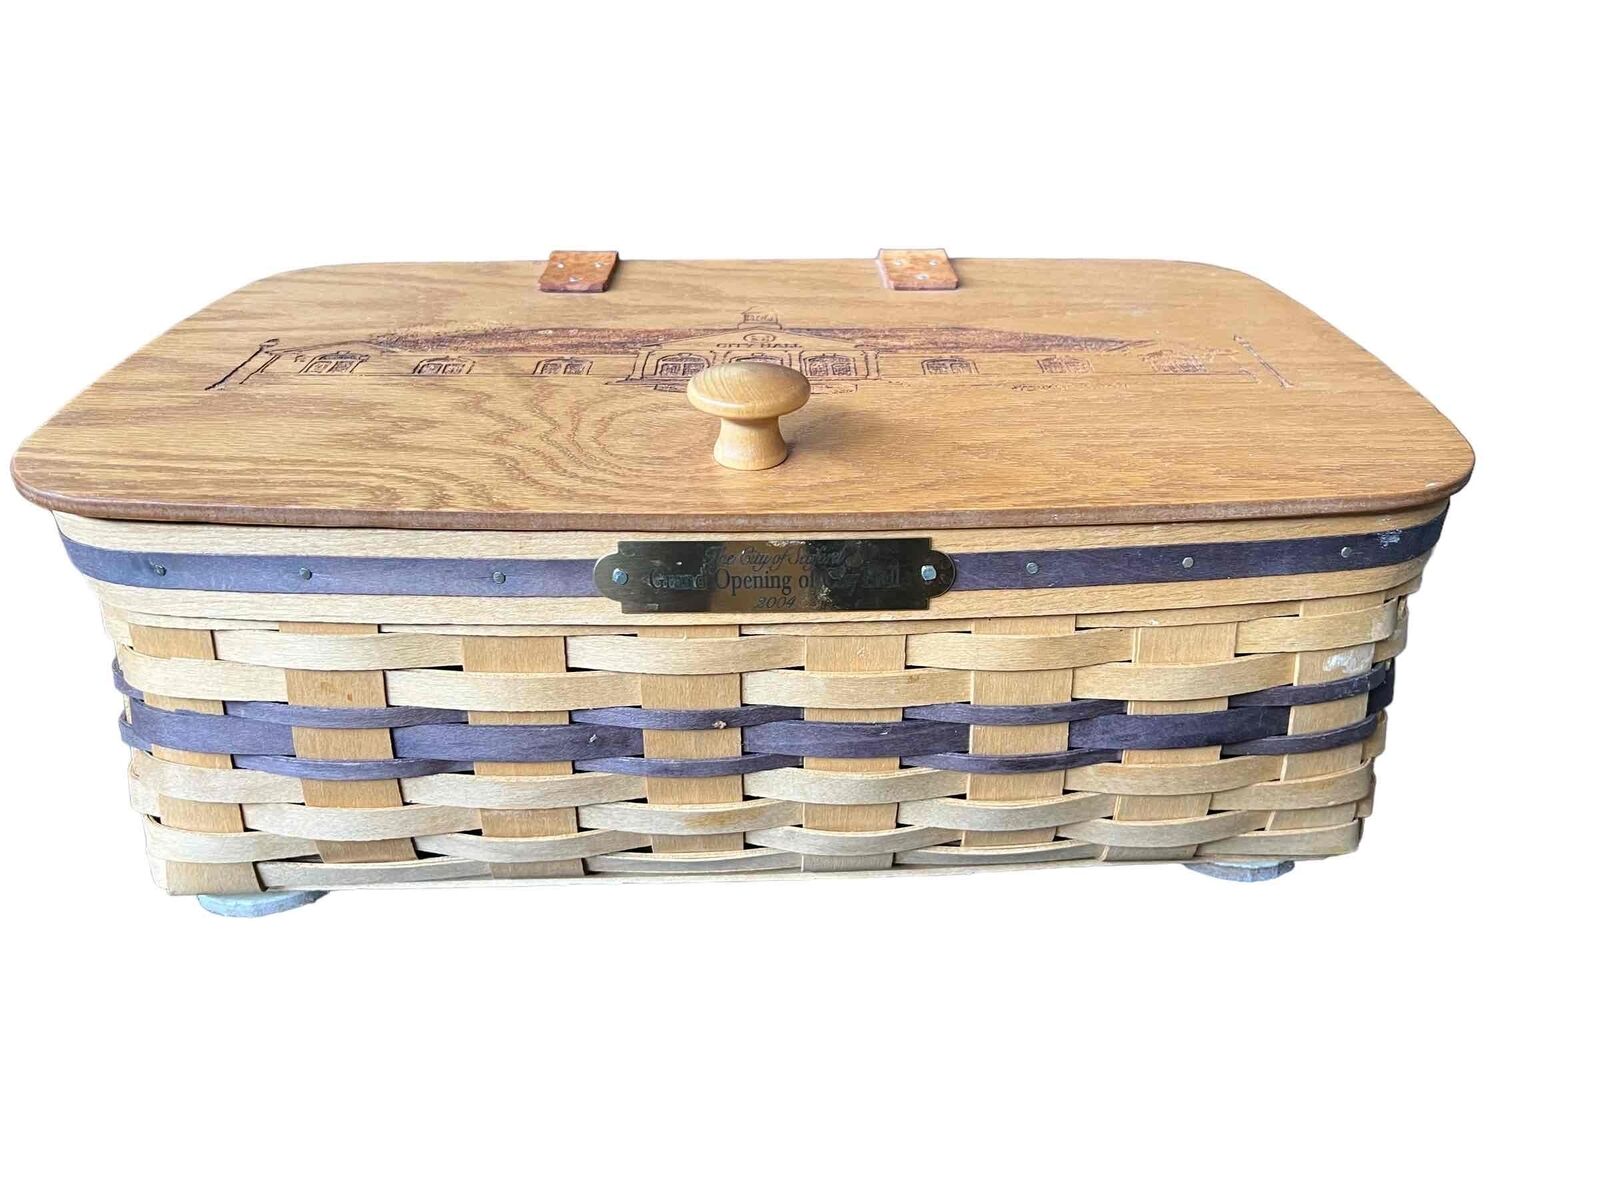 American Traditions Lidded Picnic Basket Woven Wood Limited Edition 2004